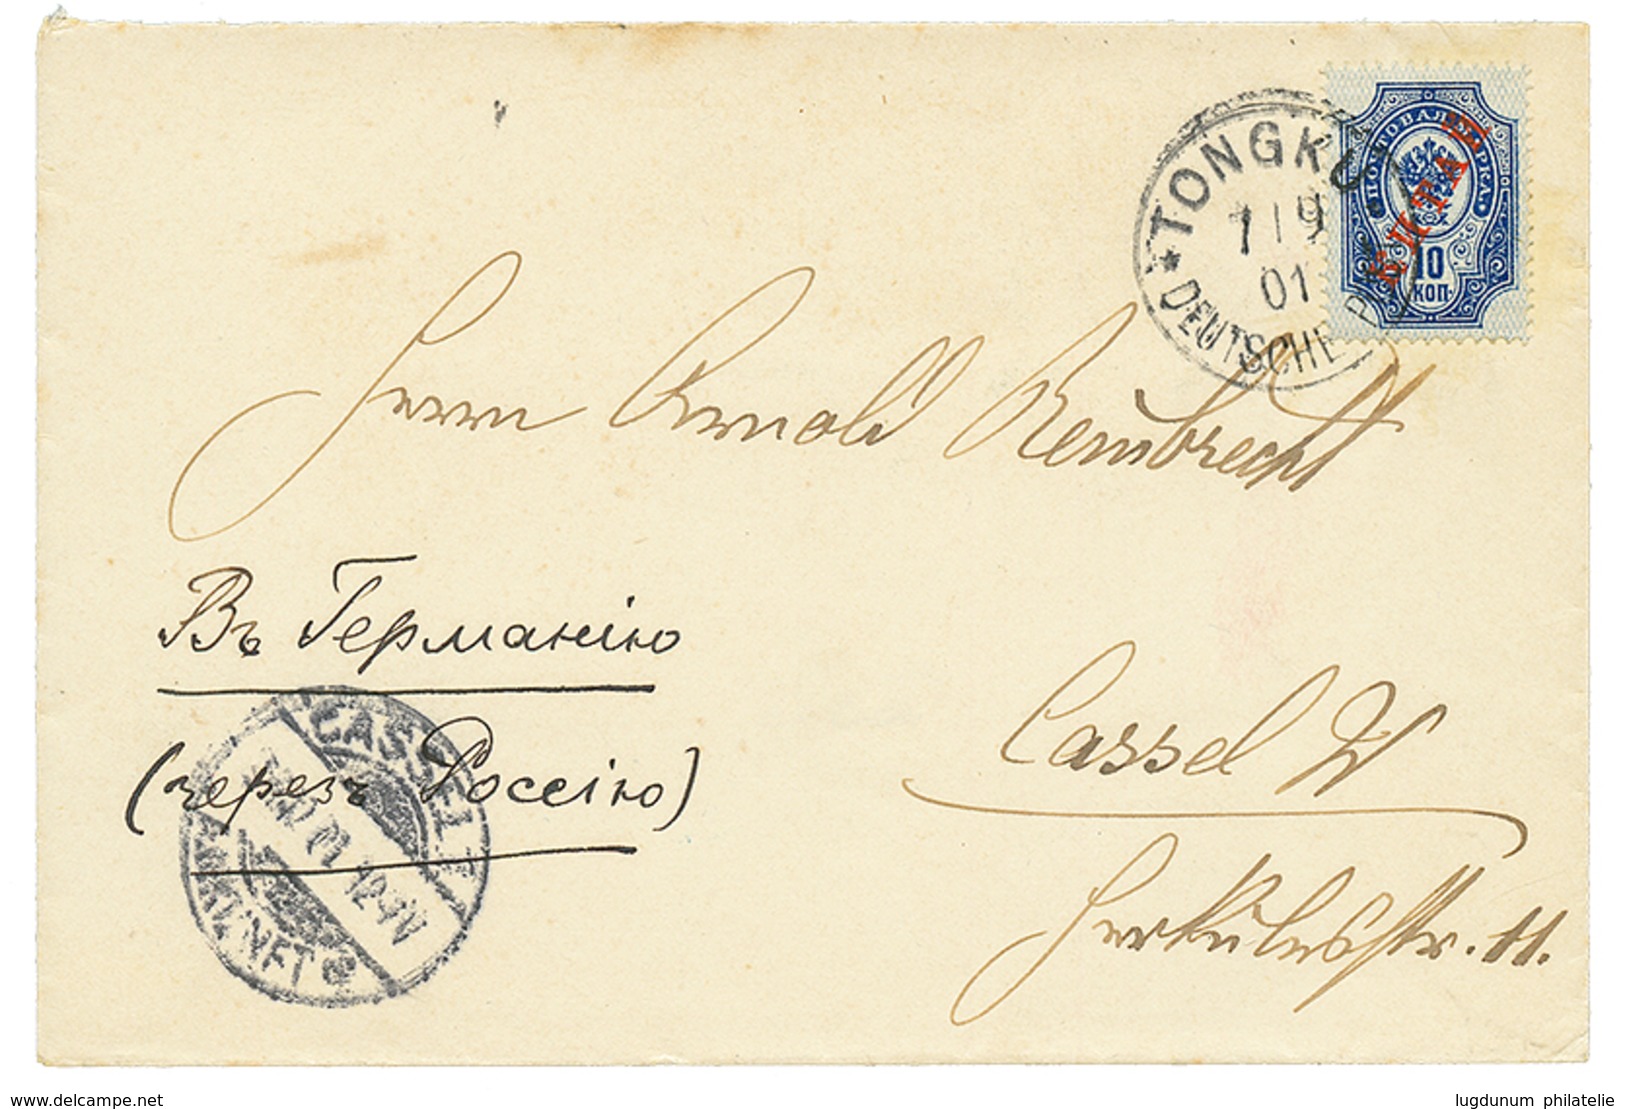 CHINA : 1901 RUSSIA P.O. 10k Canc. TONGKU DEUTSCHE POST On Envelope To GERMANY. RARE. Superb. - China (offices)